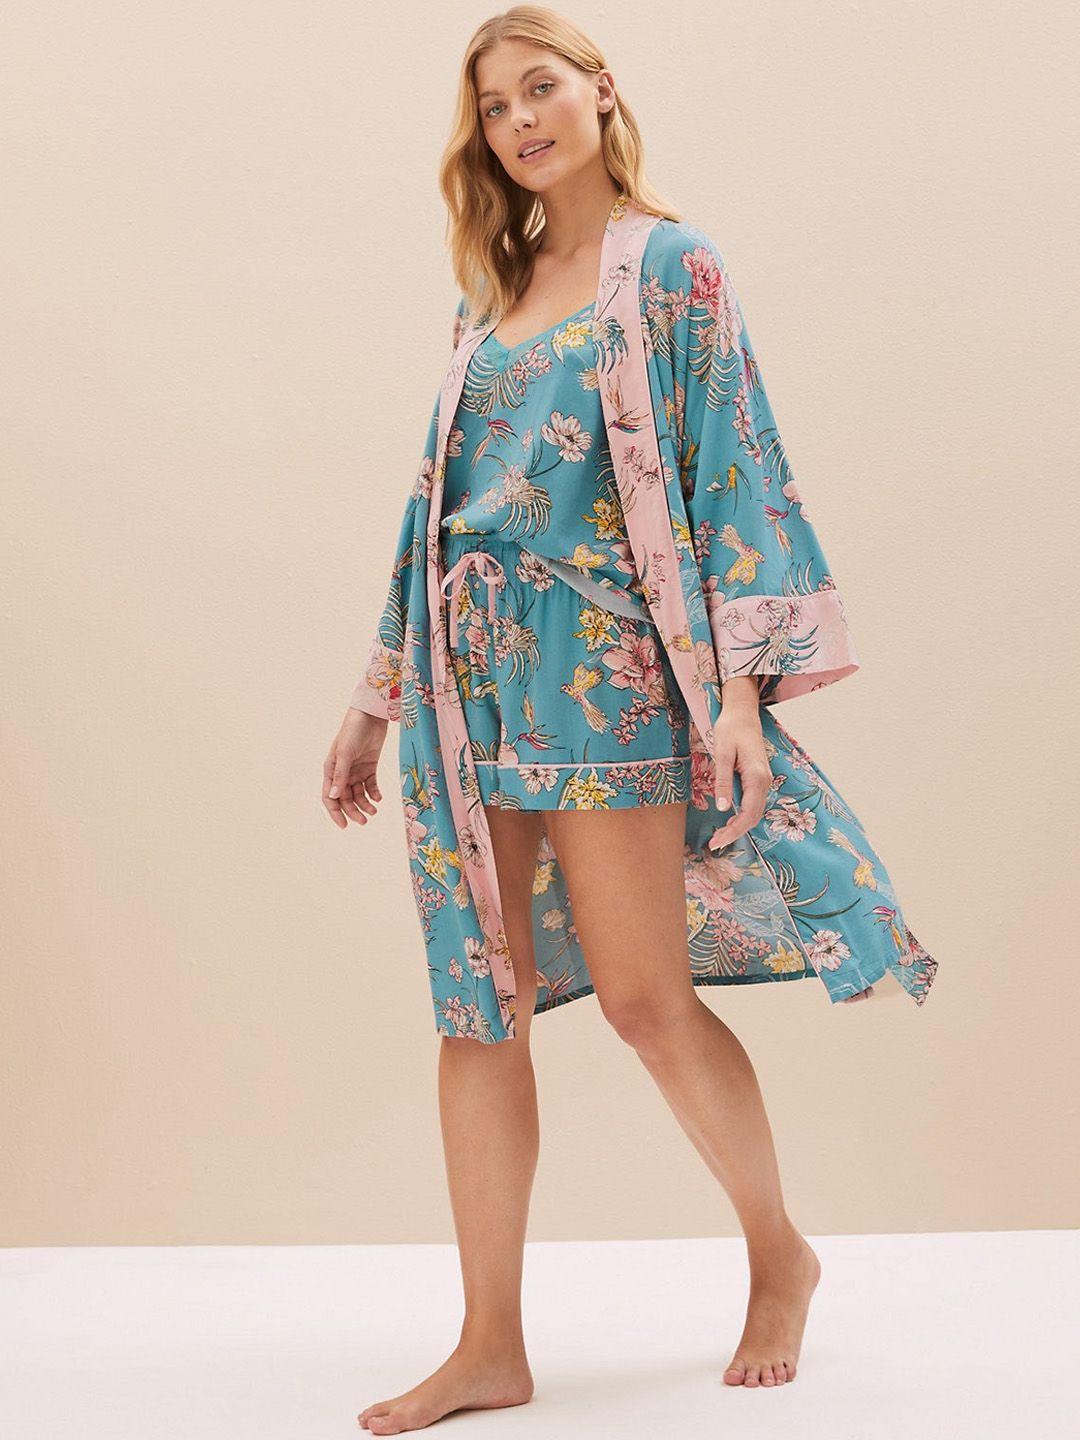 marks & spencer floral printed lace kimono robe